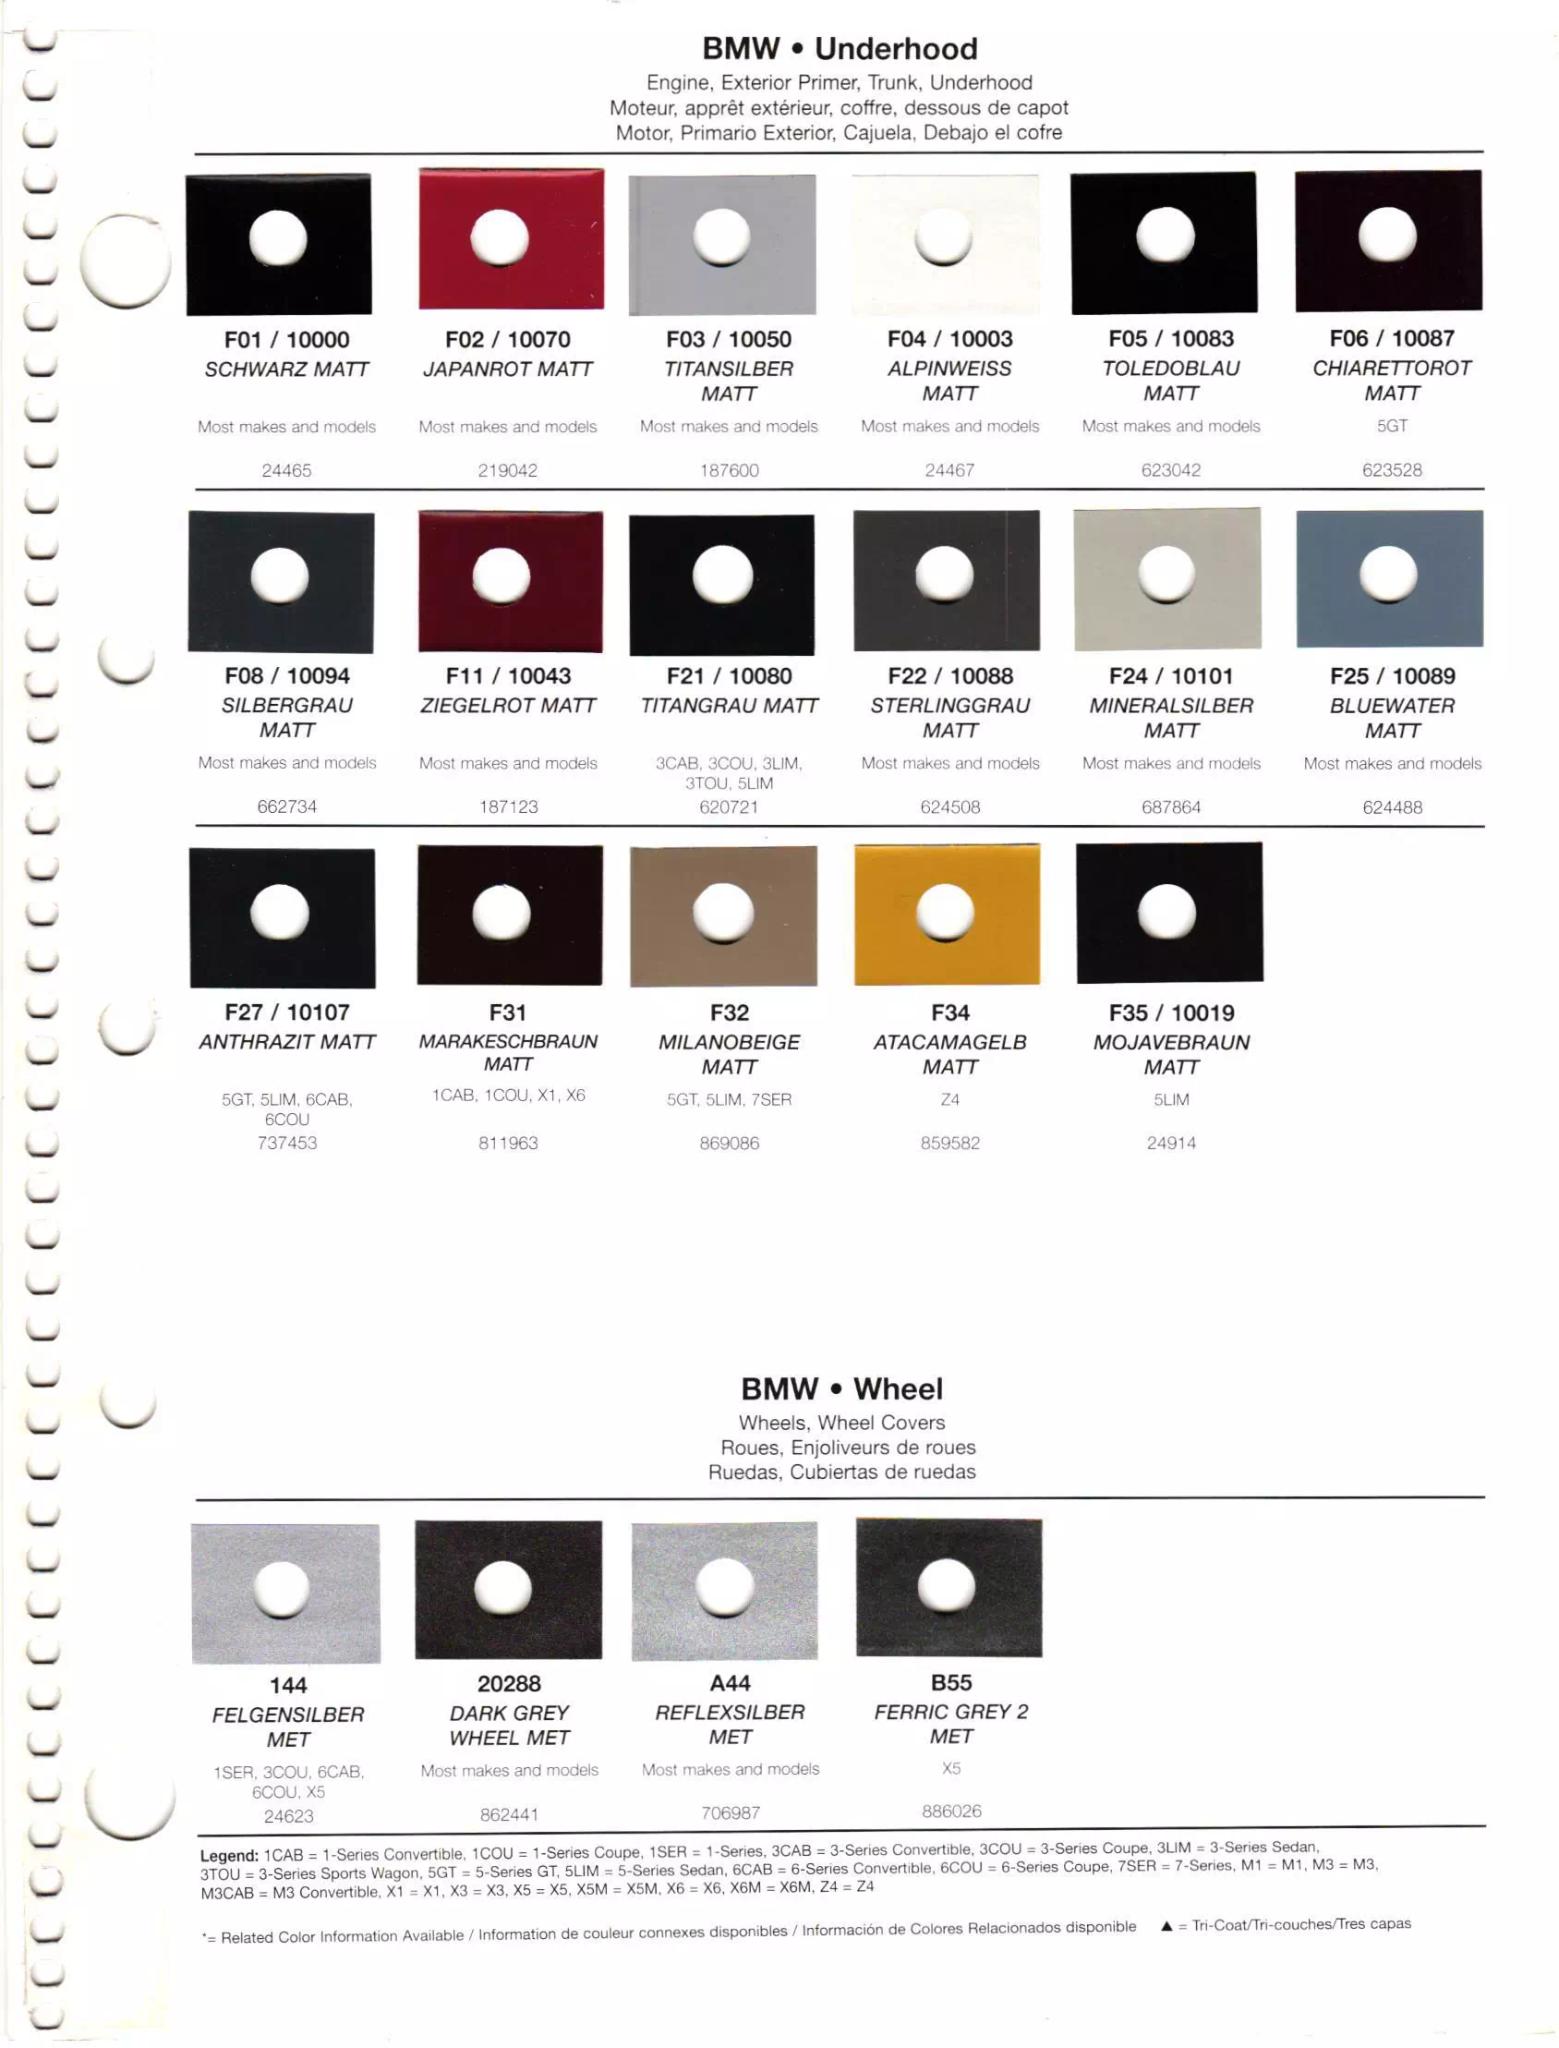 Underhood and Wheel paint codes for BMW Vehicles used in 2012.  Ordering codes, color shades, paint chips